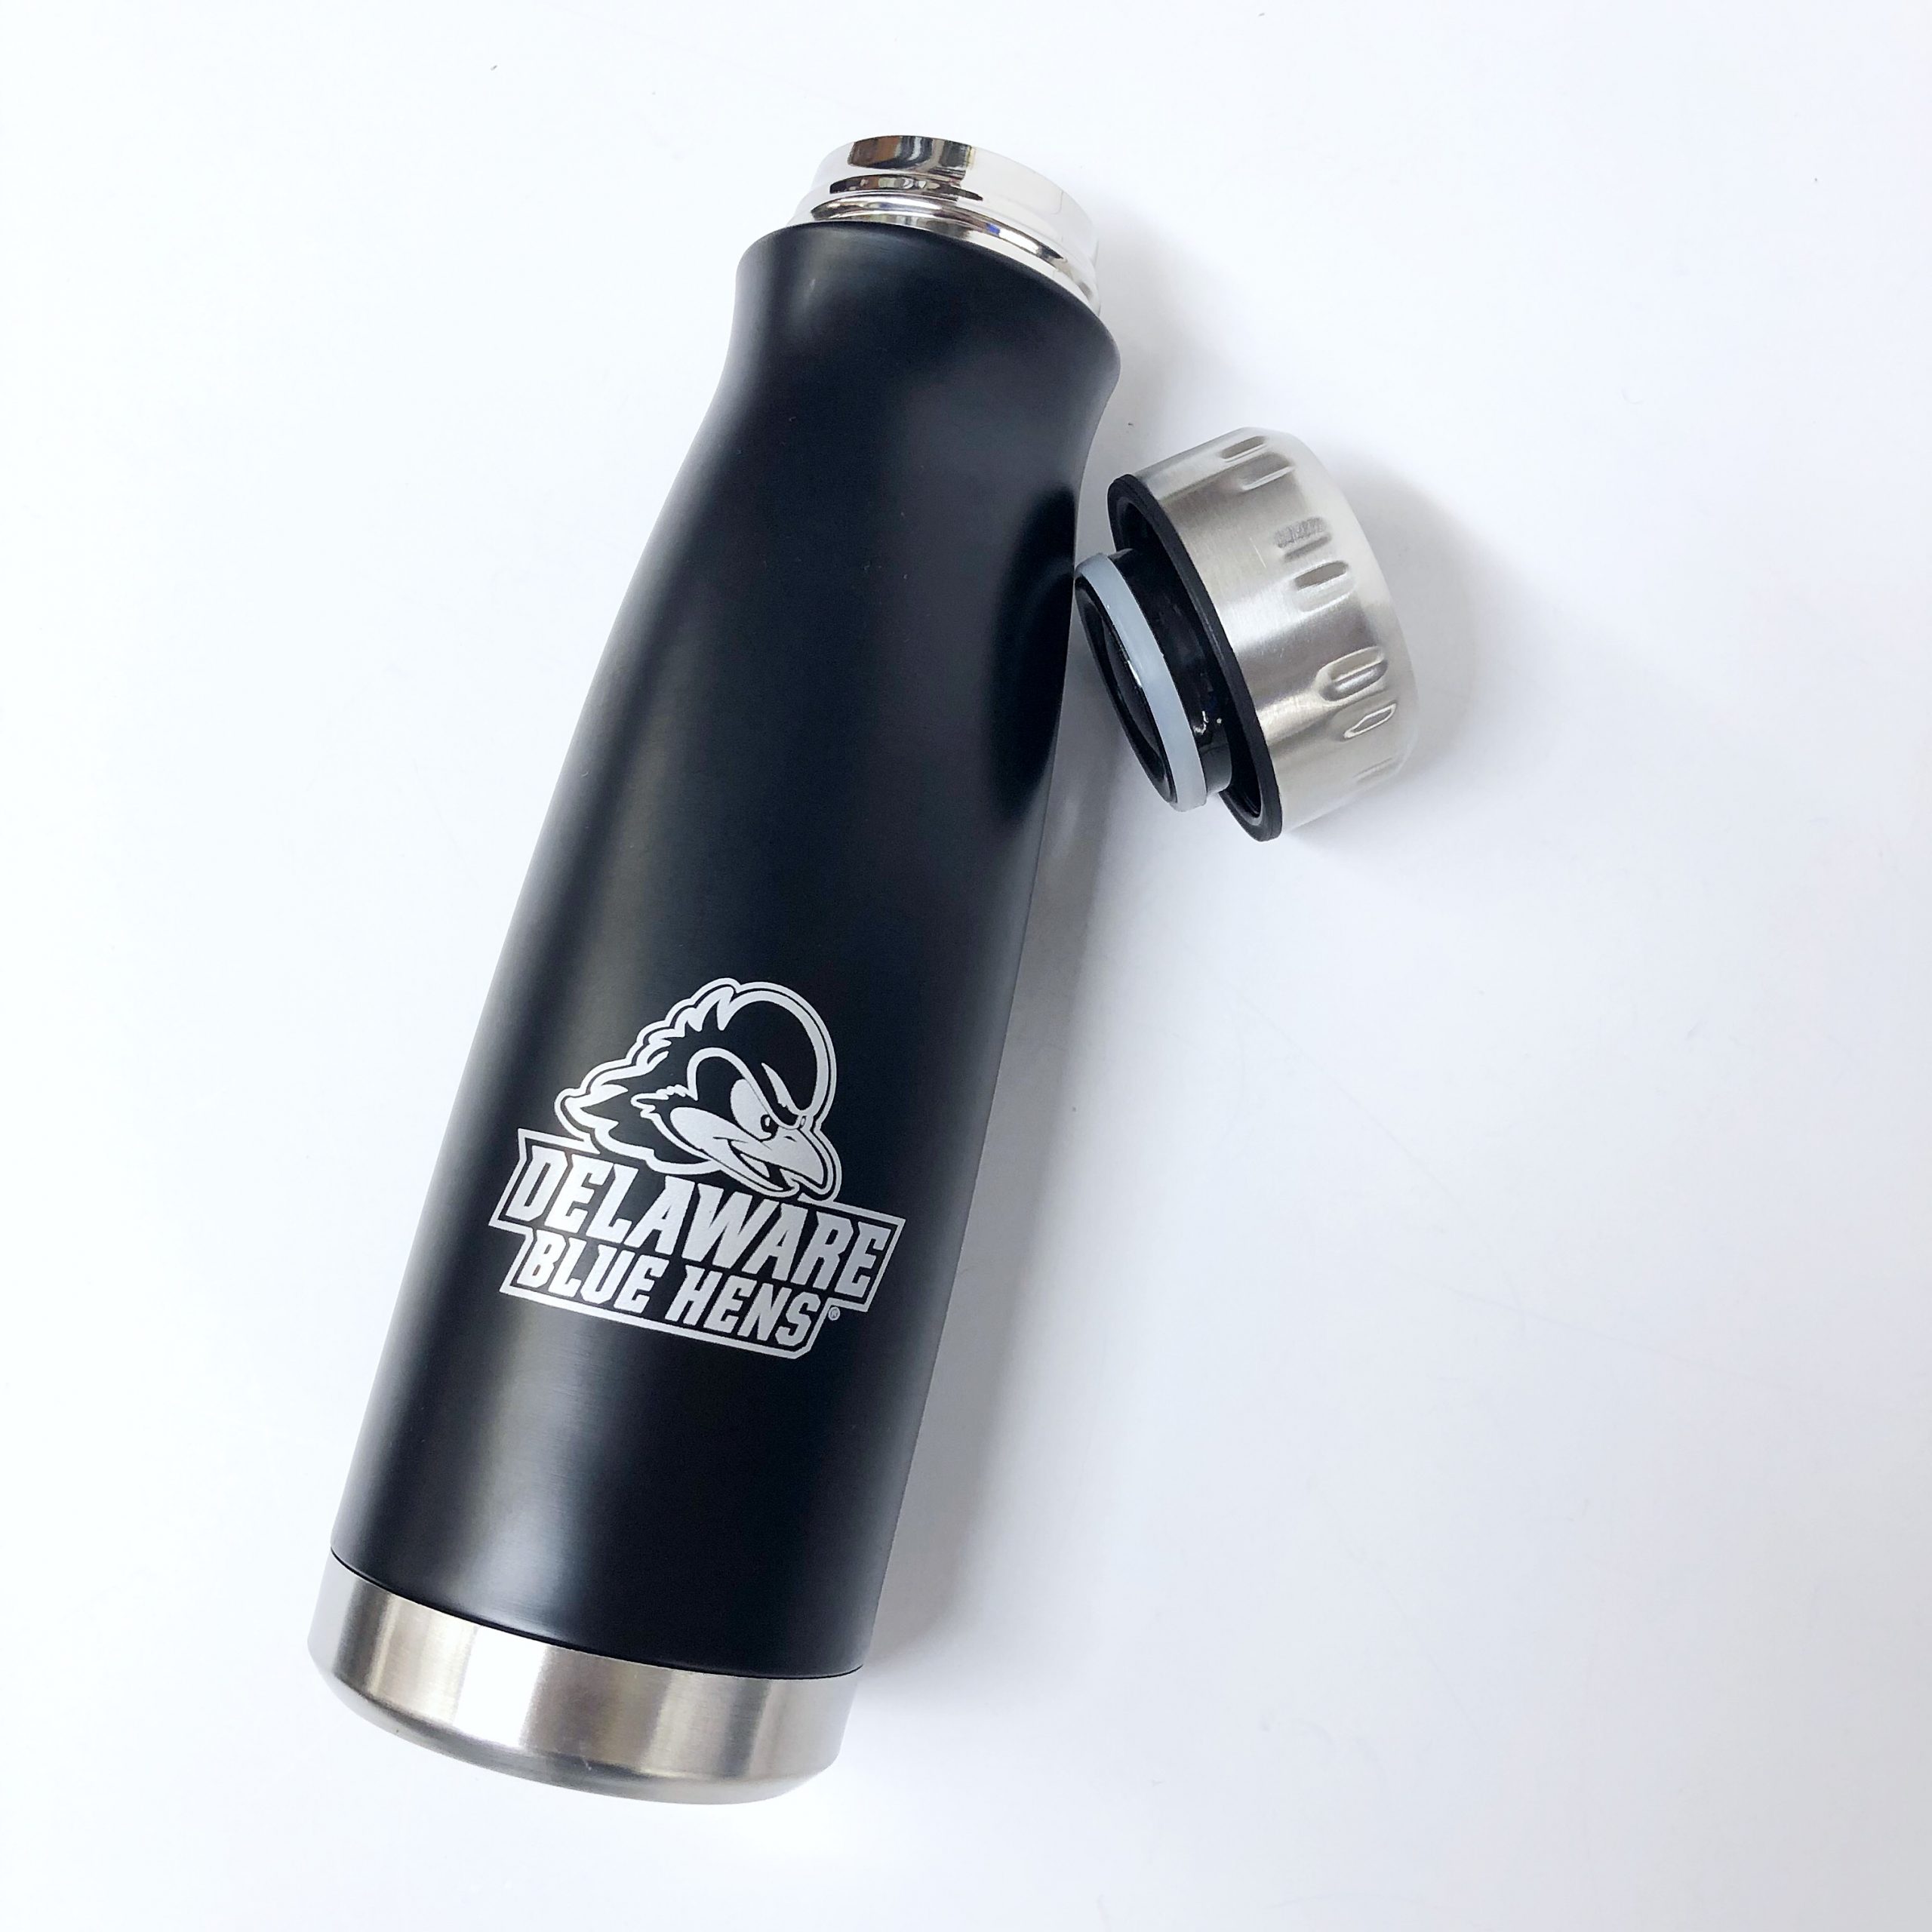 https://www.national5and10.com/wp-content/uploads/2019/07/University-of-Delaware-Insulated-Stainless-Commuter-Water-Bottle-4-scaled.jpg